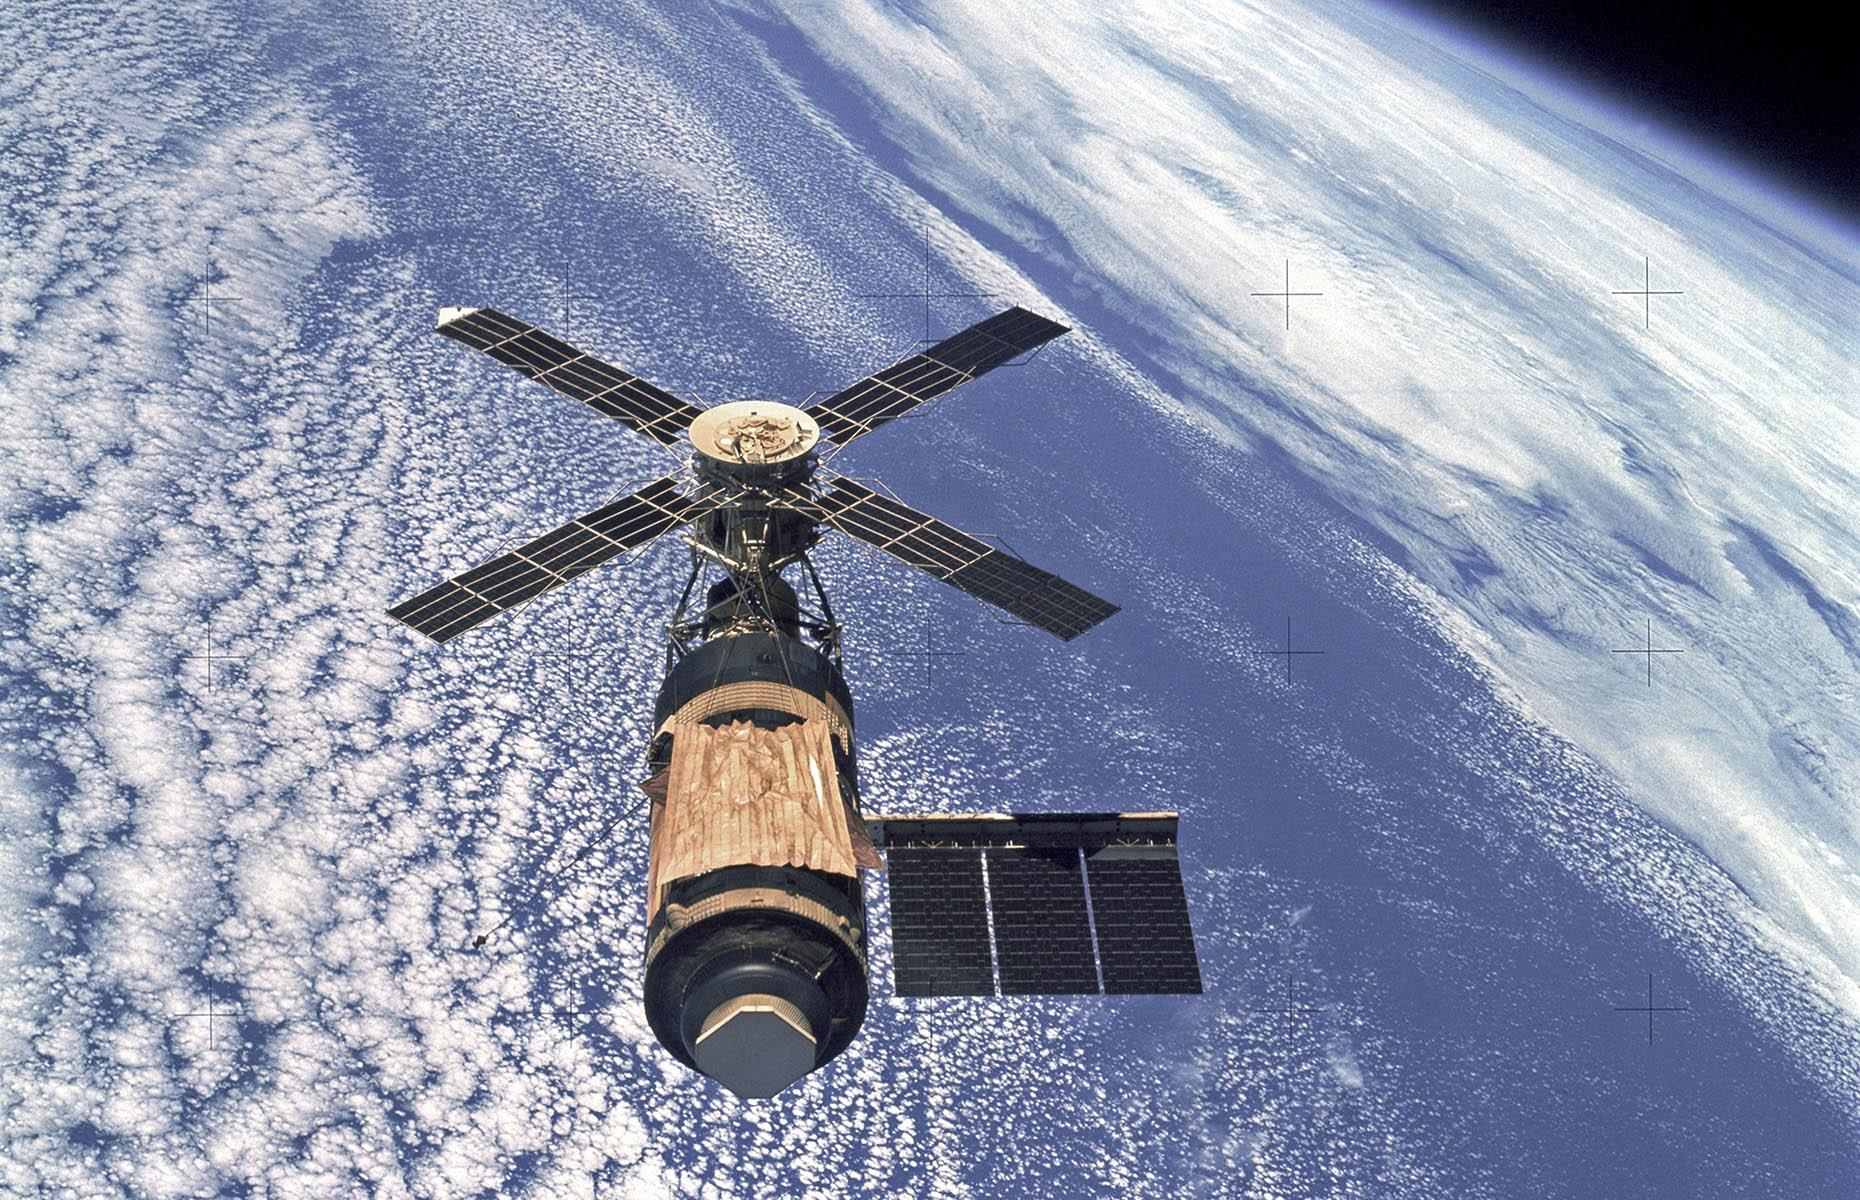 <p>America's first space station was in orbit from 1973 to 1979, when the out-of-control 77-ton spacecraft came hurtling back to Earth. A huge media event at the time, the demise of Skylab had the world on tenterhooks.</p>  <p>Thankfully, it disintegrated over Western Australia with no casualties.</p>